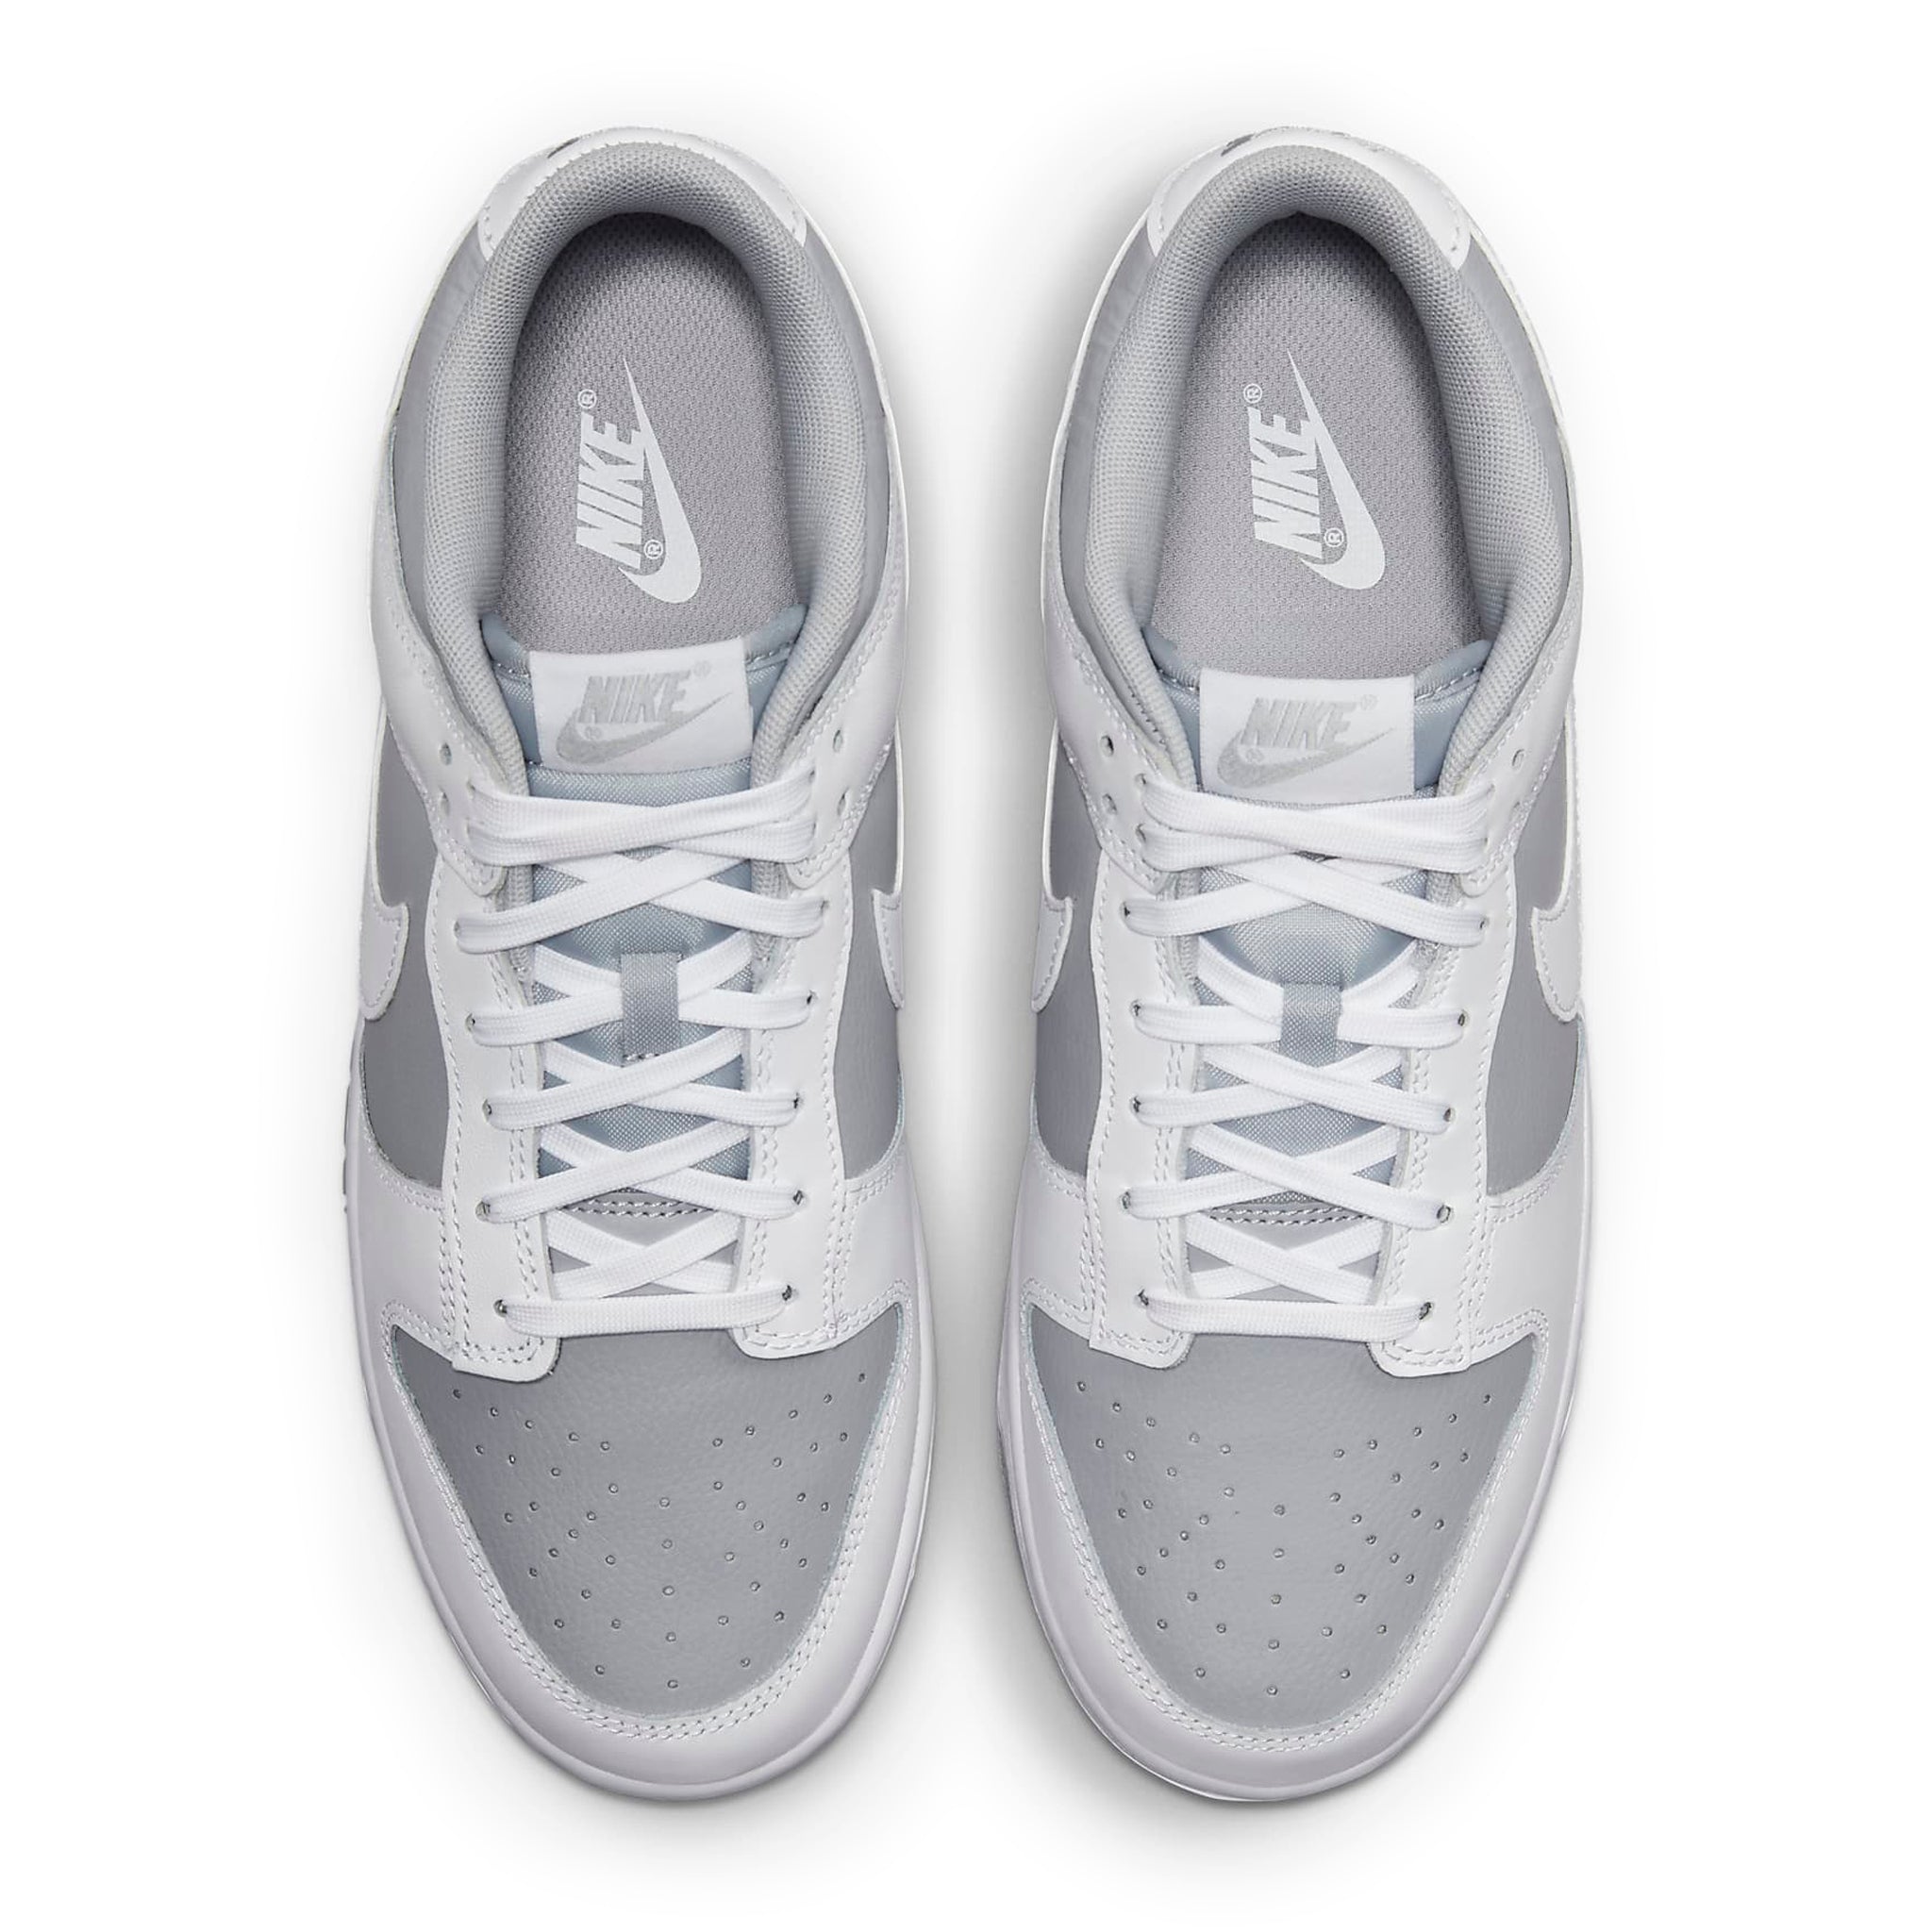 Top down view of Nike Dunk Low White Neutral Grey DJ6188-003